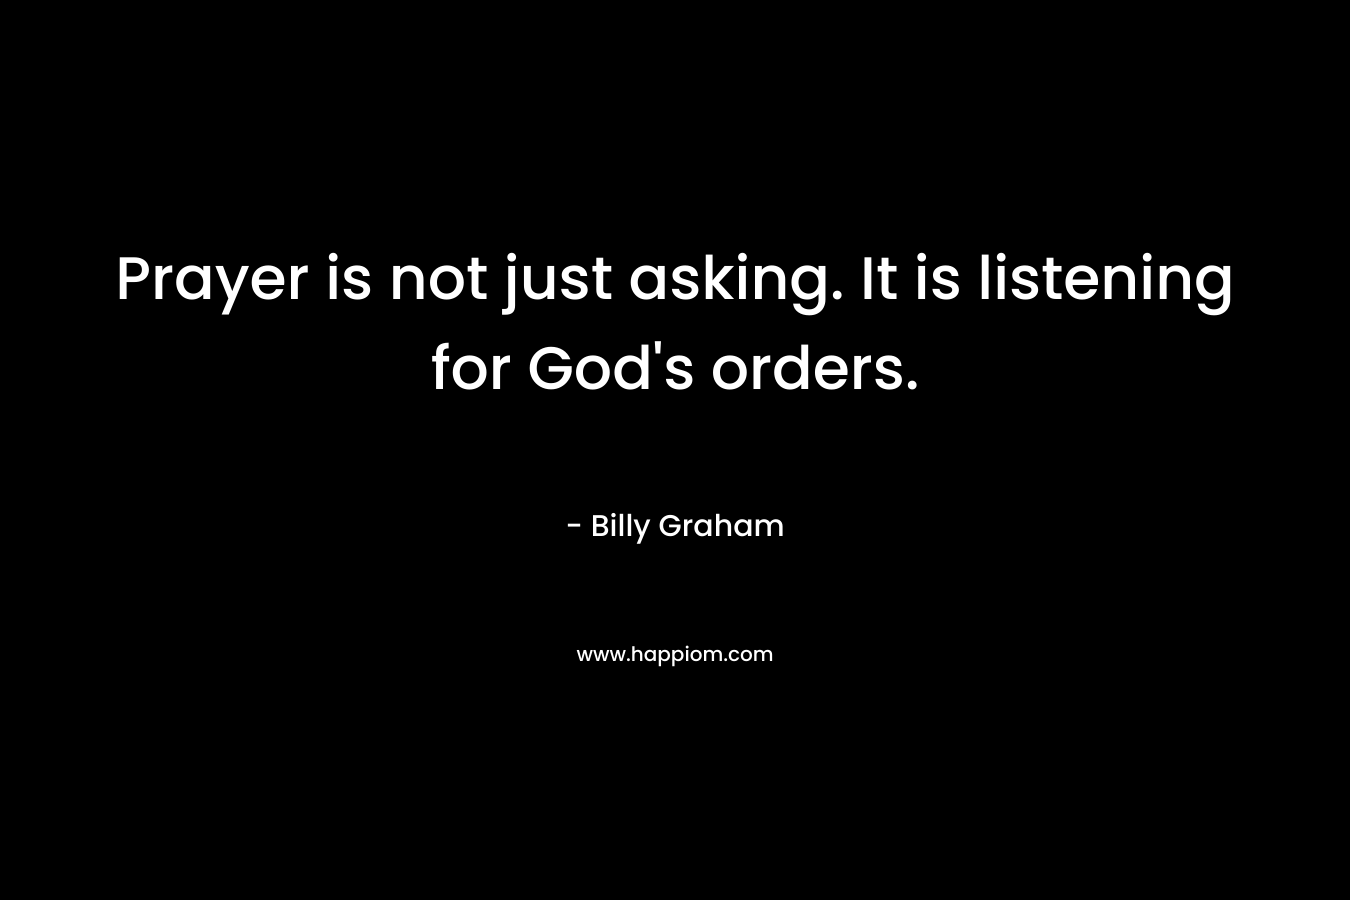 Prayer is not just asking. It is listening for God's orders.